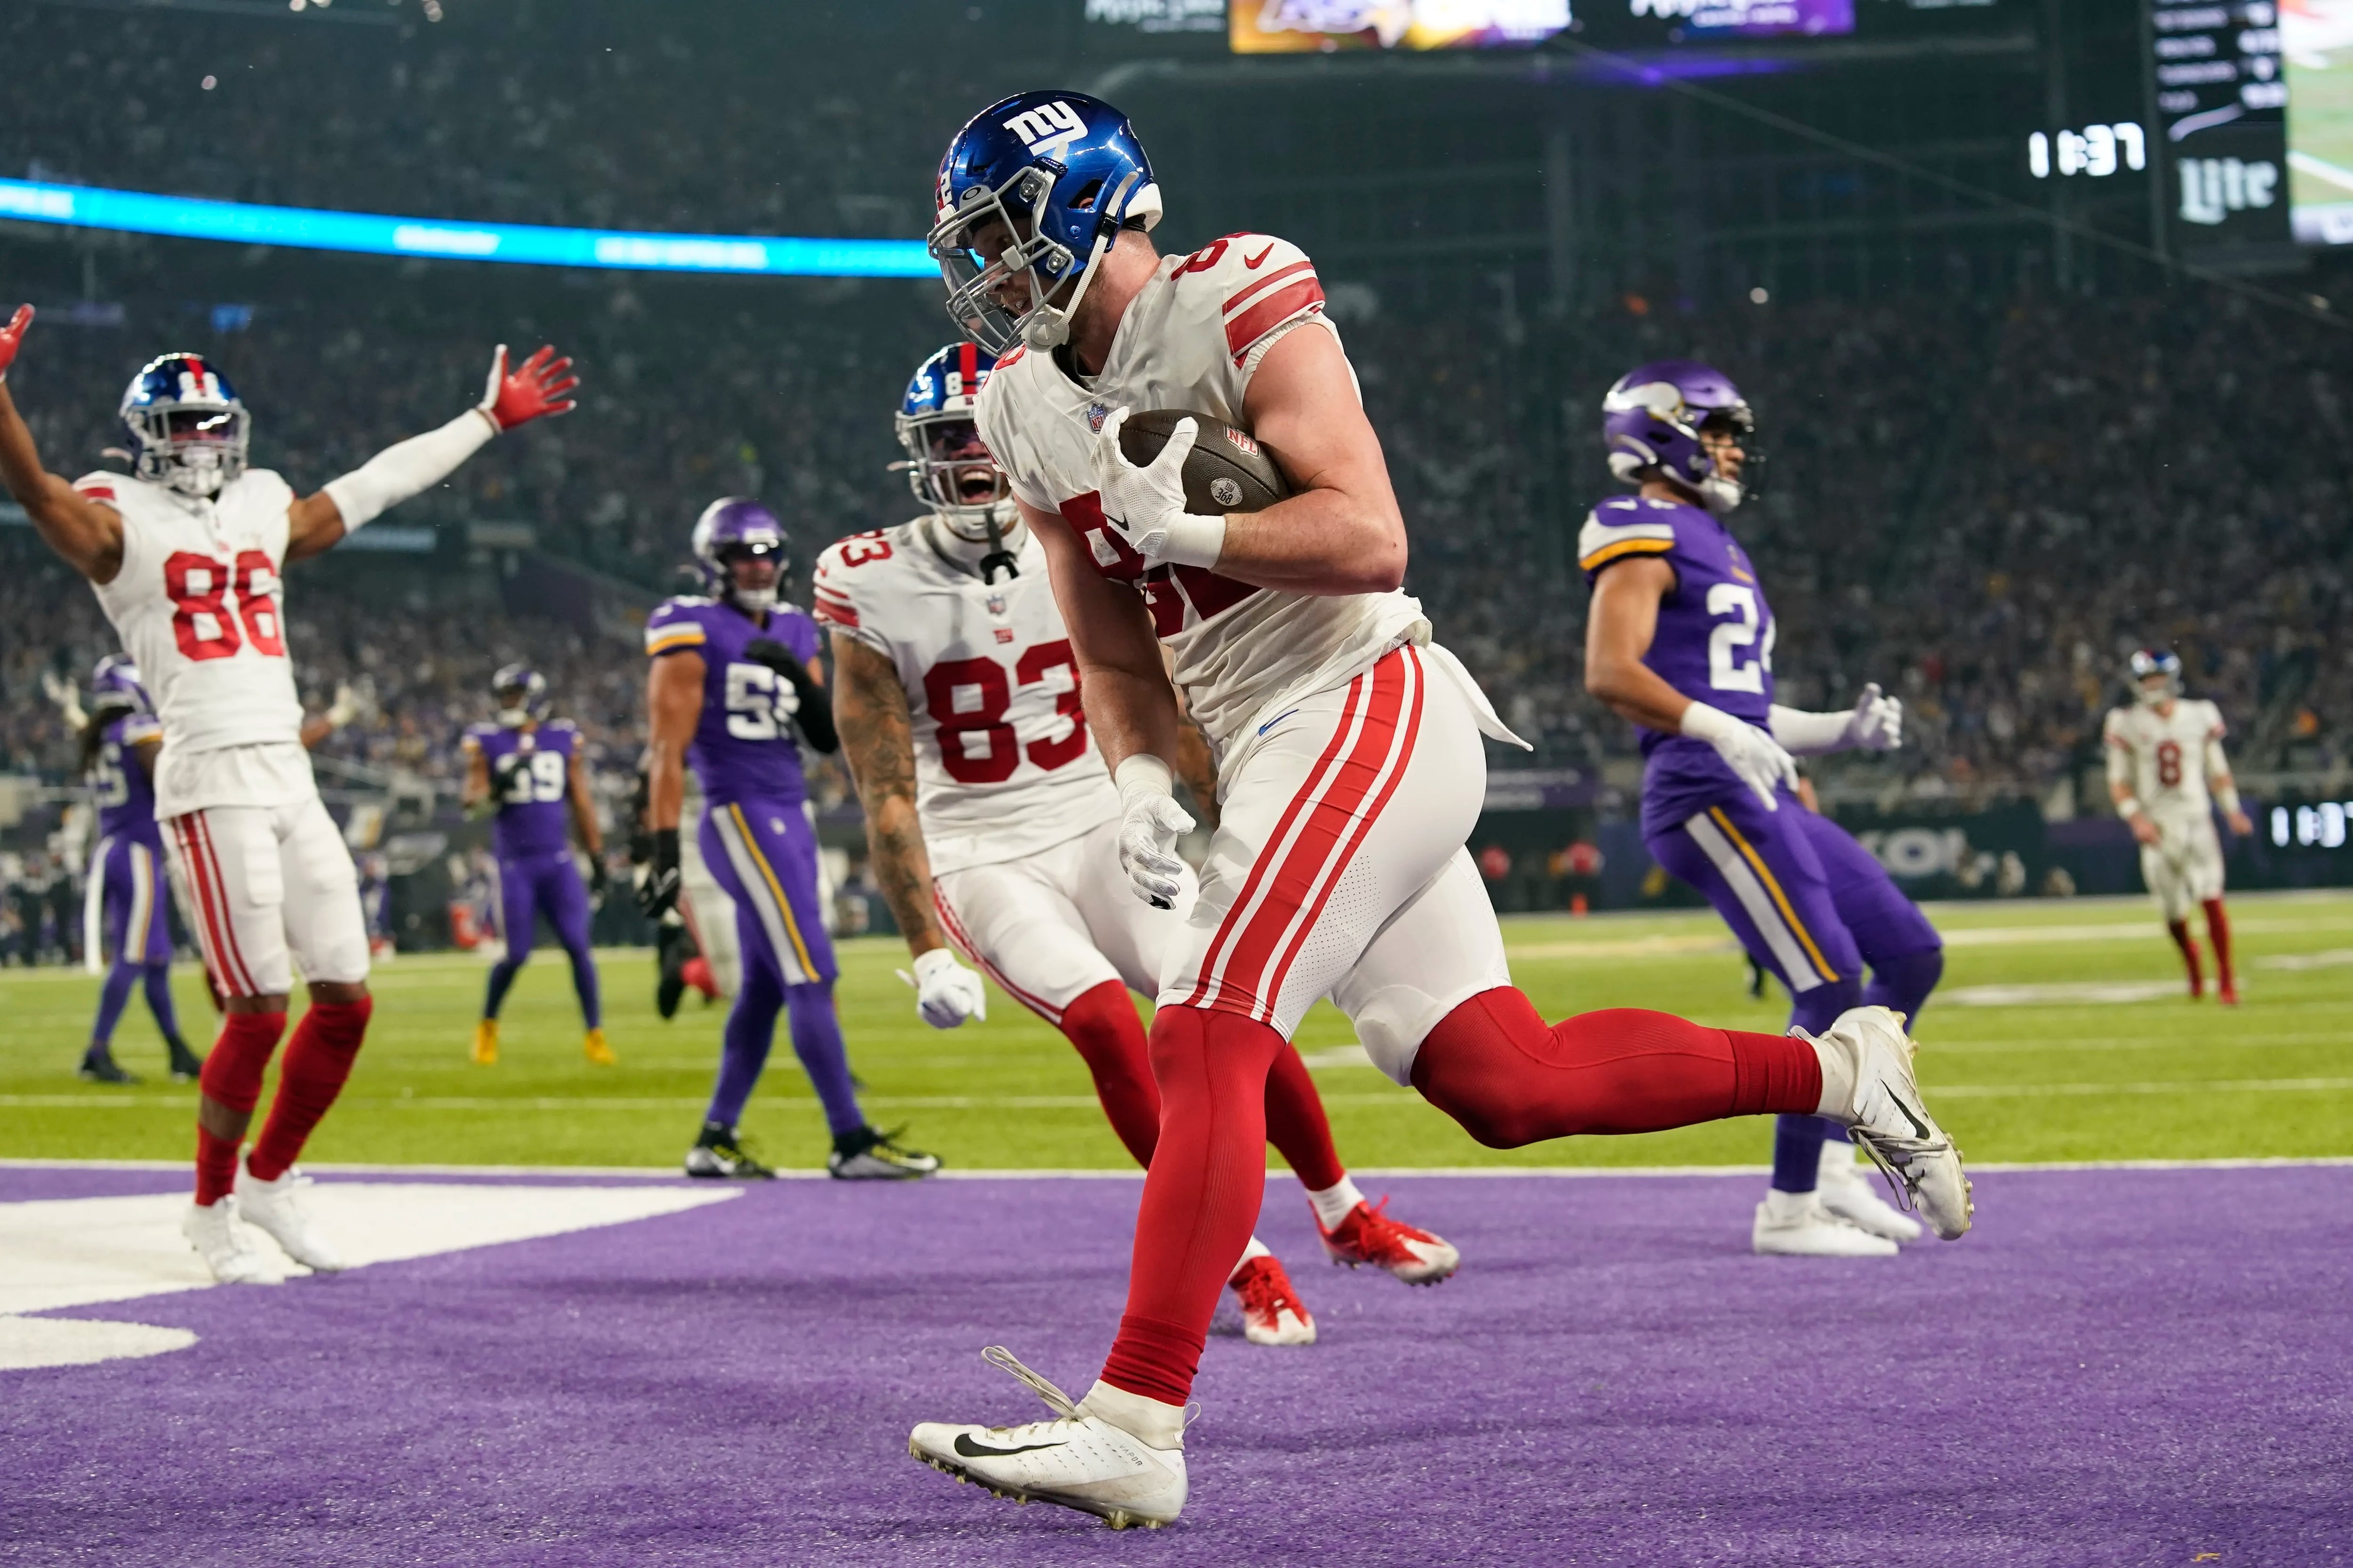 Eagles will face familiar foe in playoffs after Giants upset the Vikings